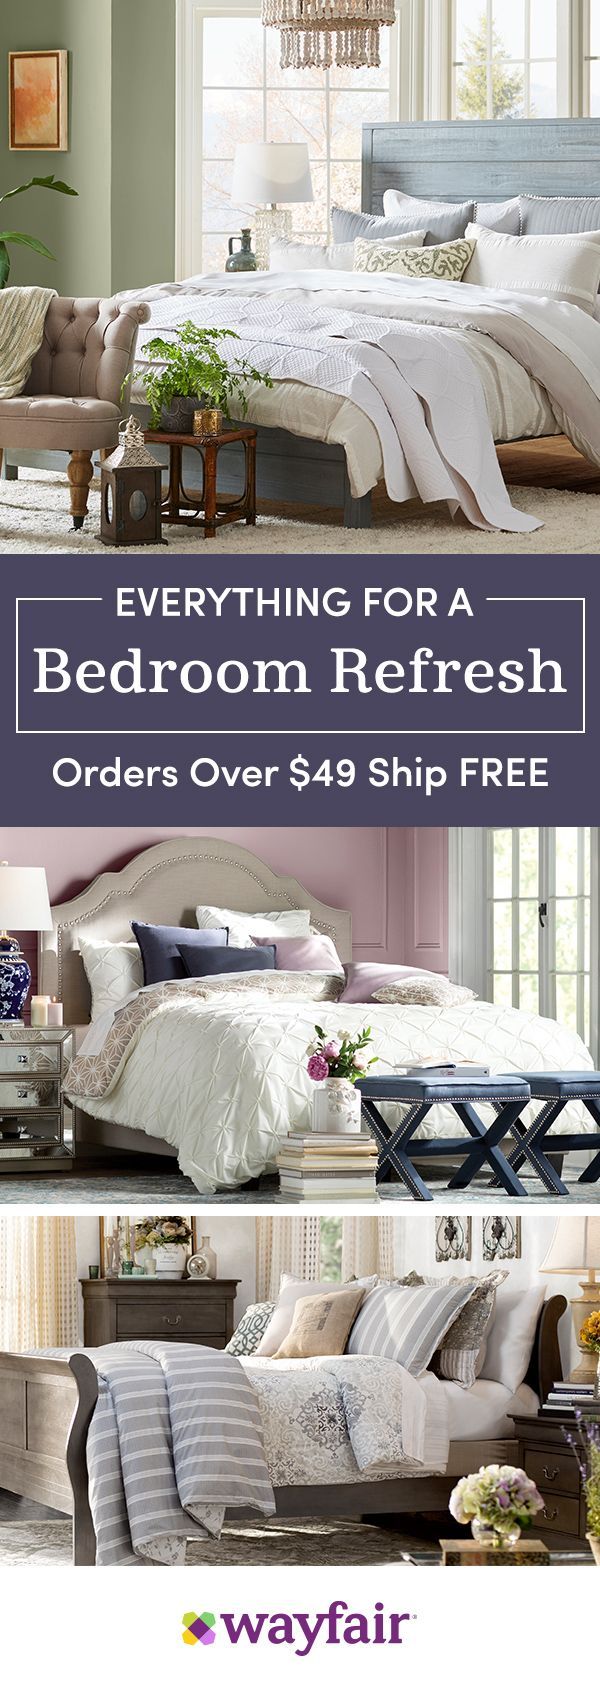 Sign up for access to exclusive sales on bedroom essentials, all at up to 70% OFF! -   23 diy projects Clothes link
 ideas